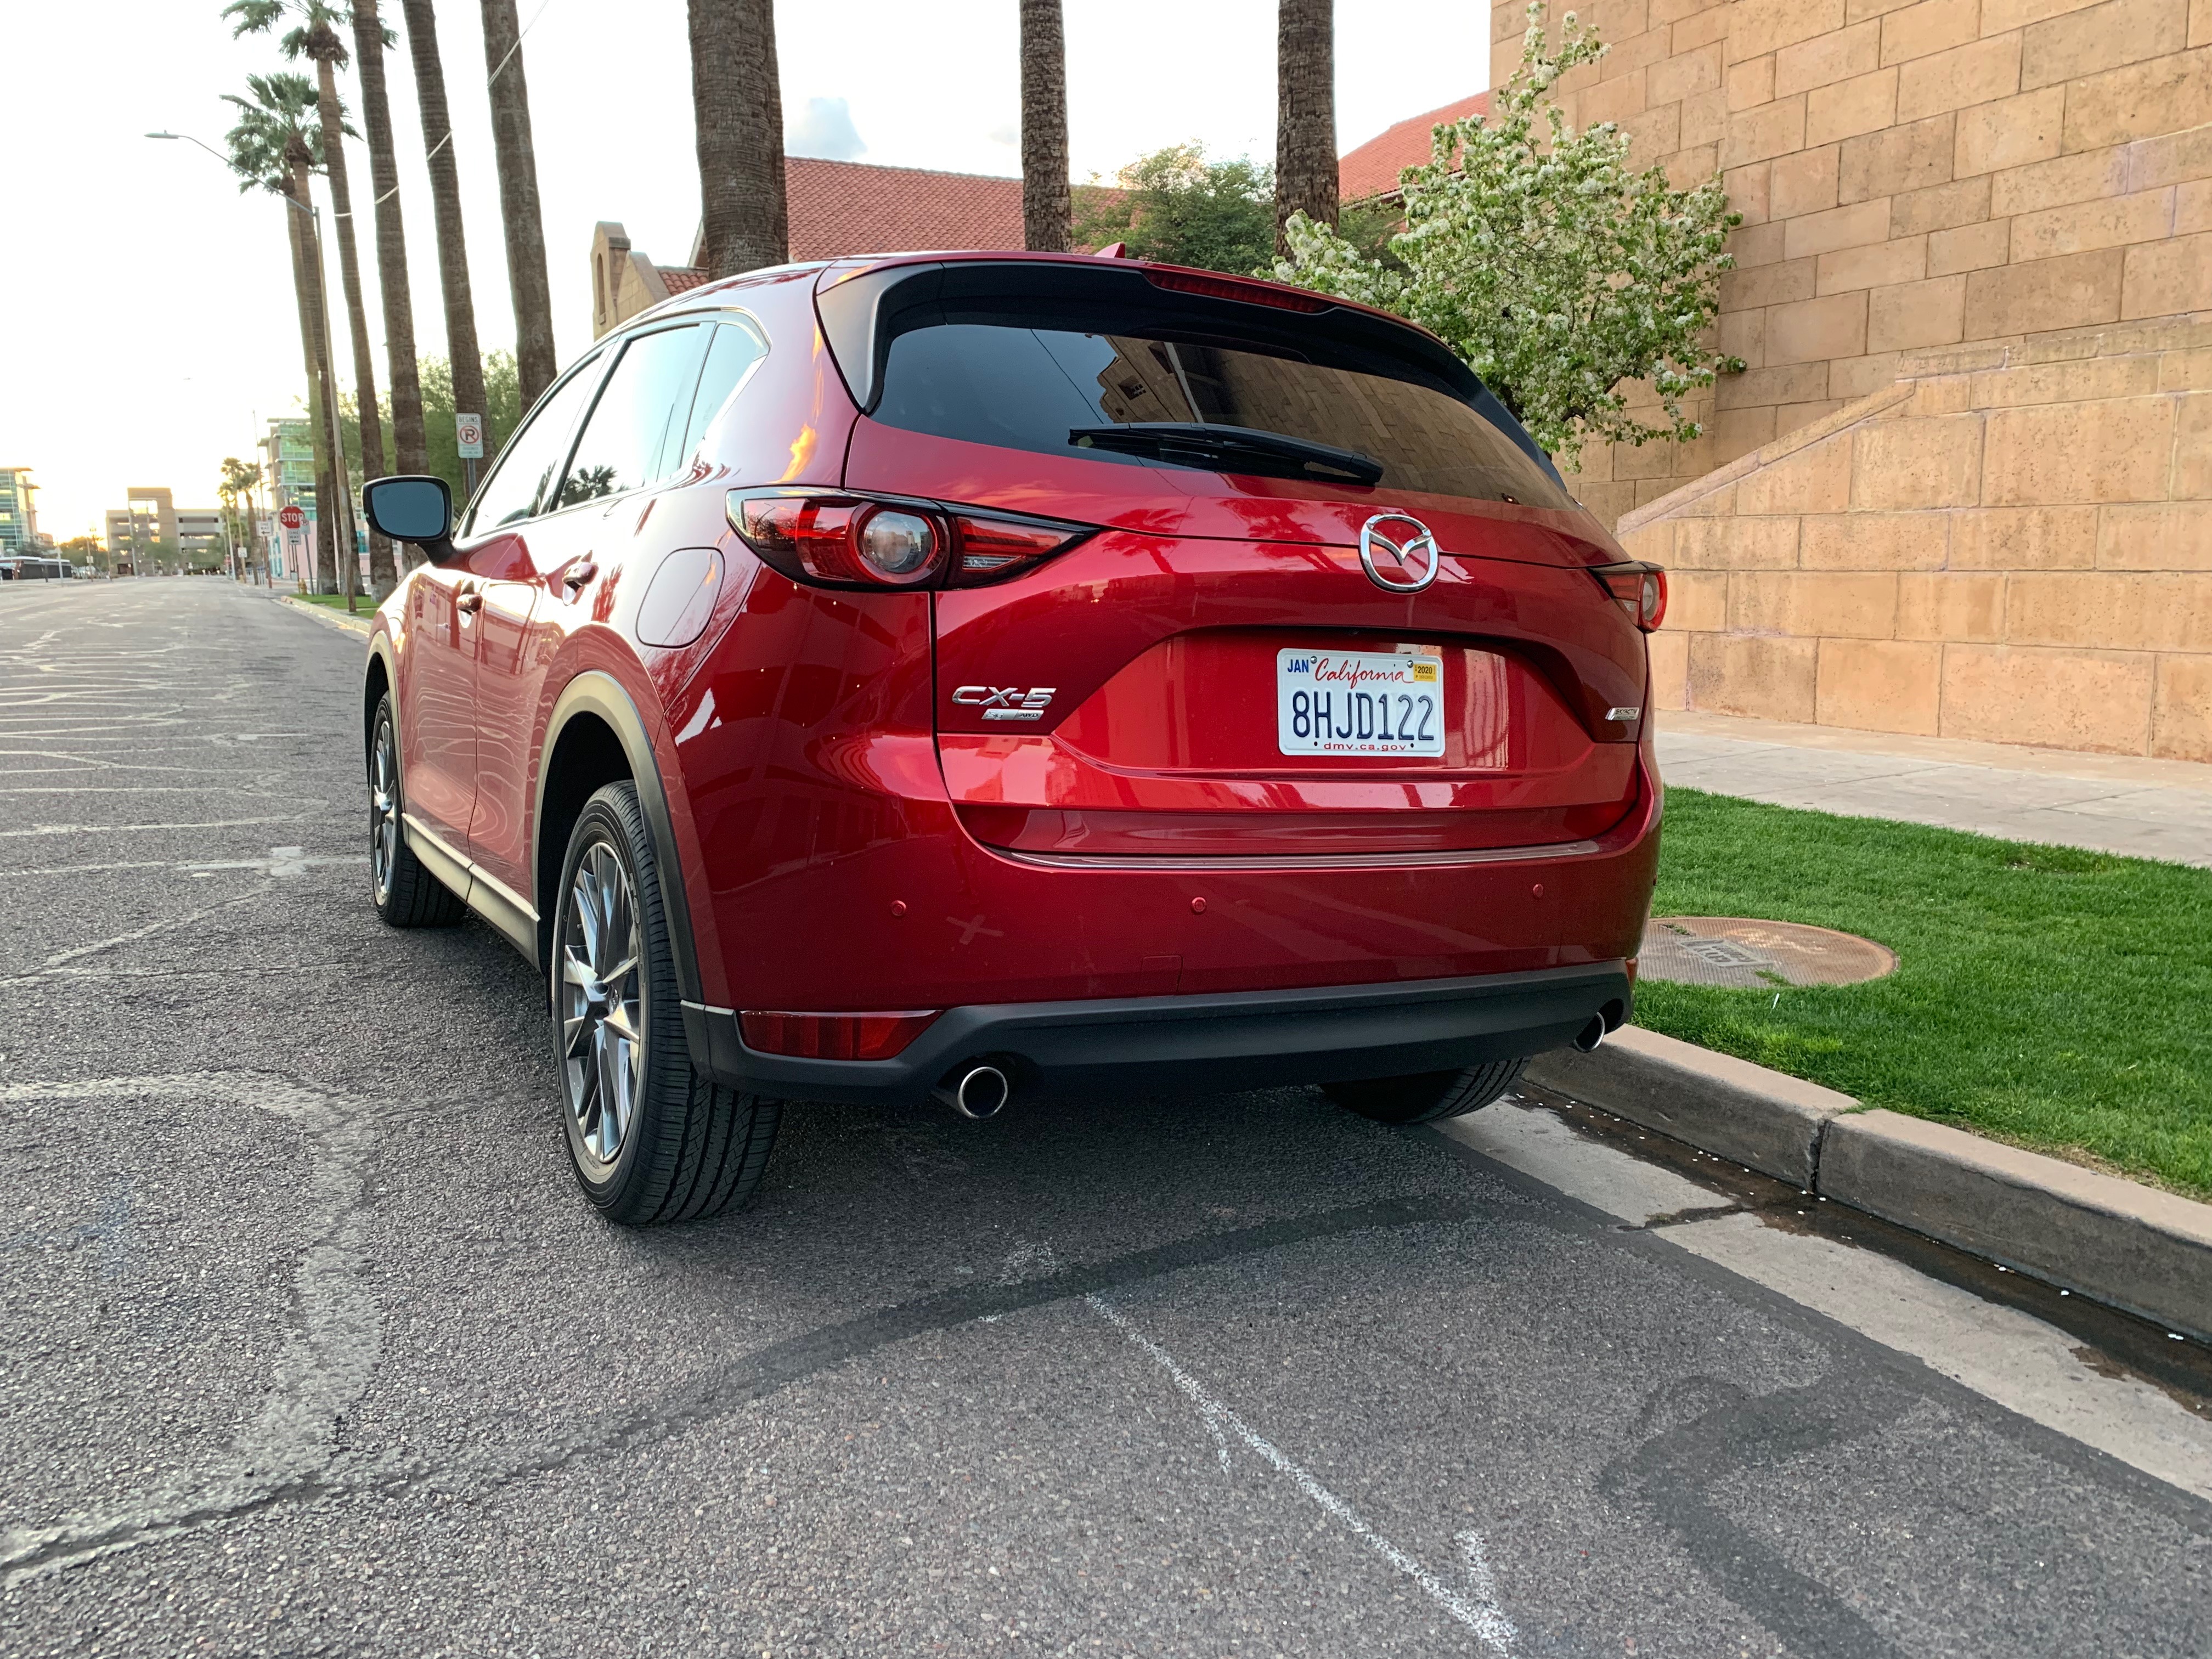 The 2019 Mazda CX-5 is making a deserved name for itself in the crowded compact SUV market. | Carter Nacke photos